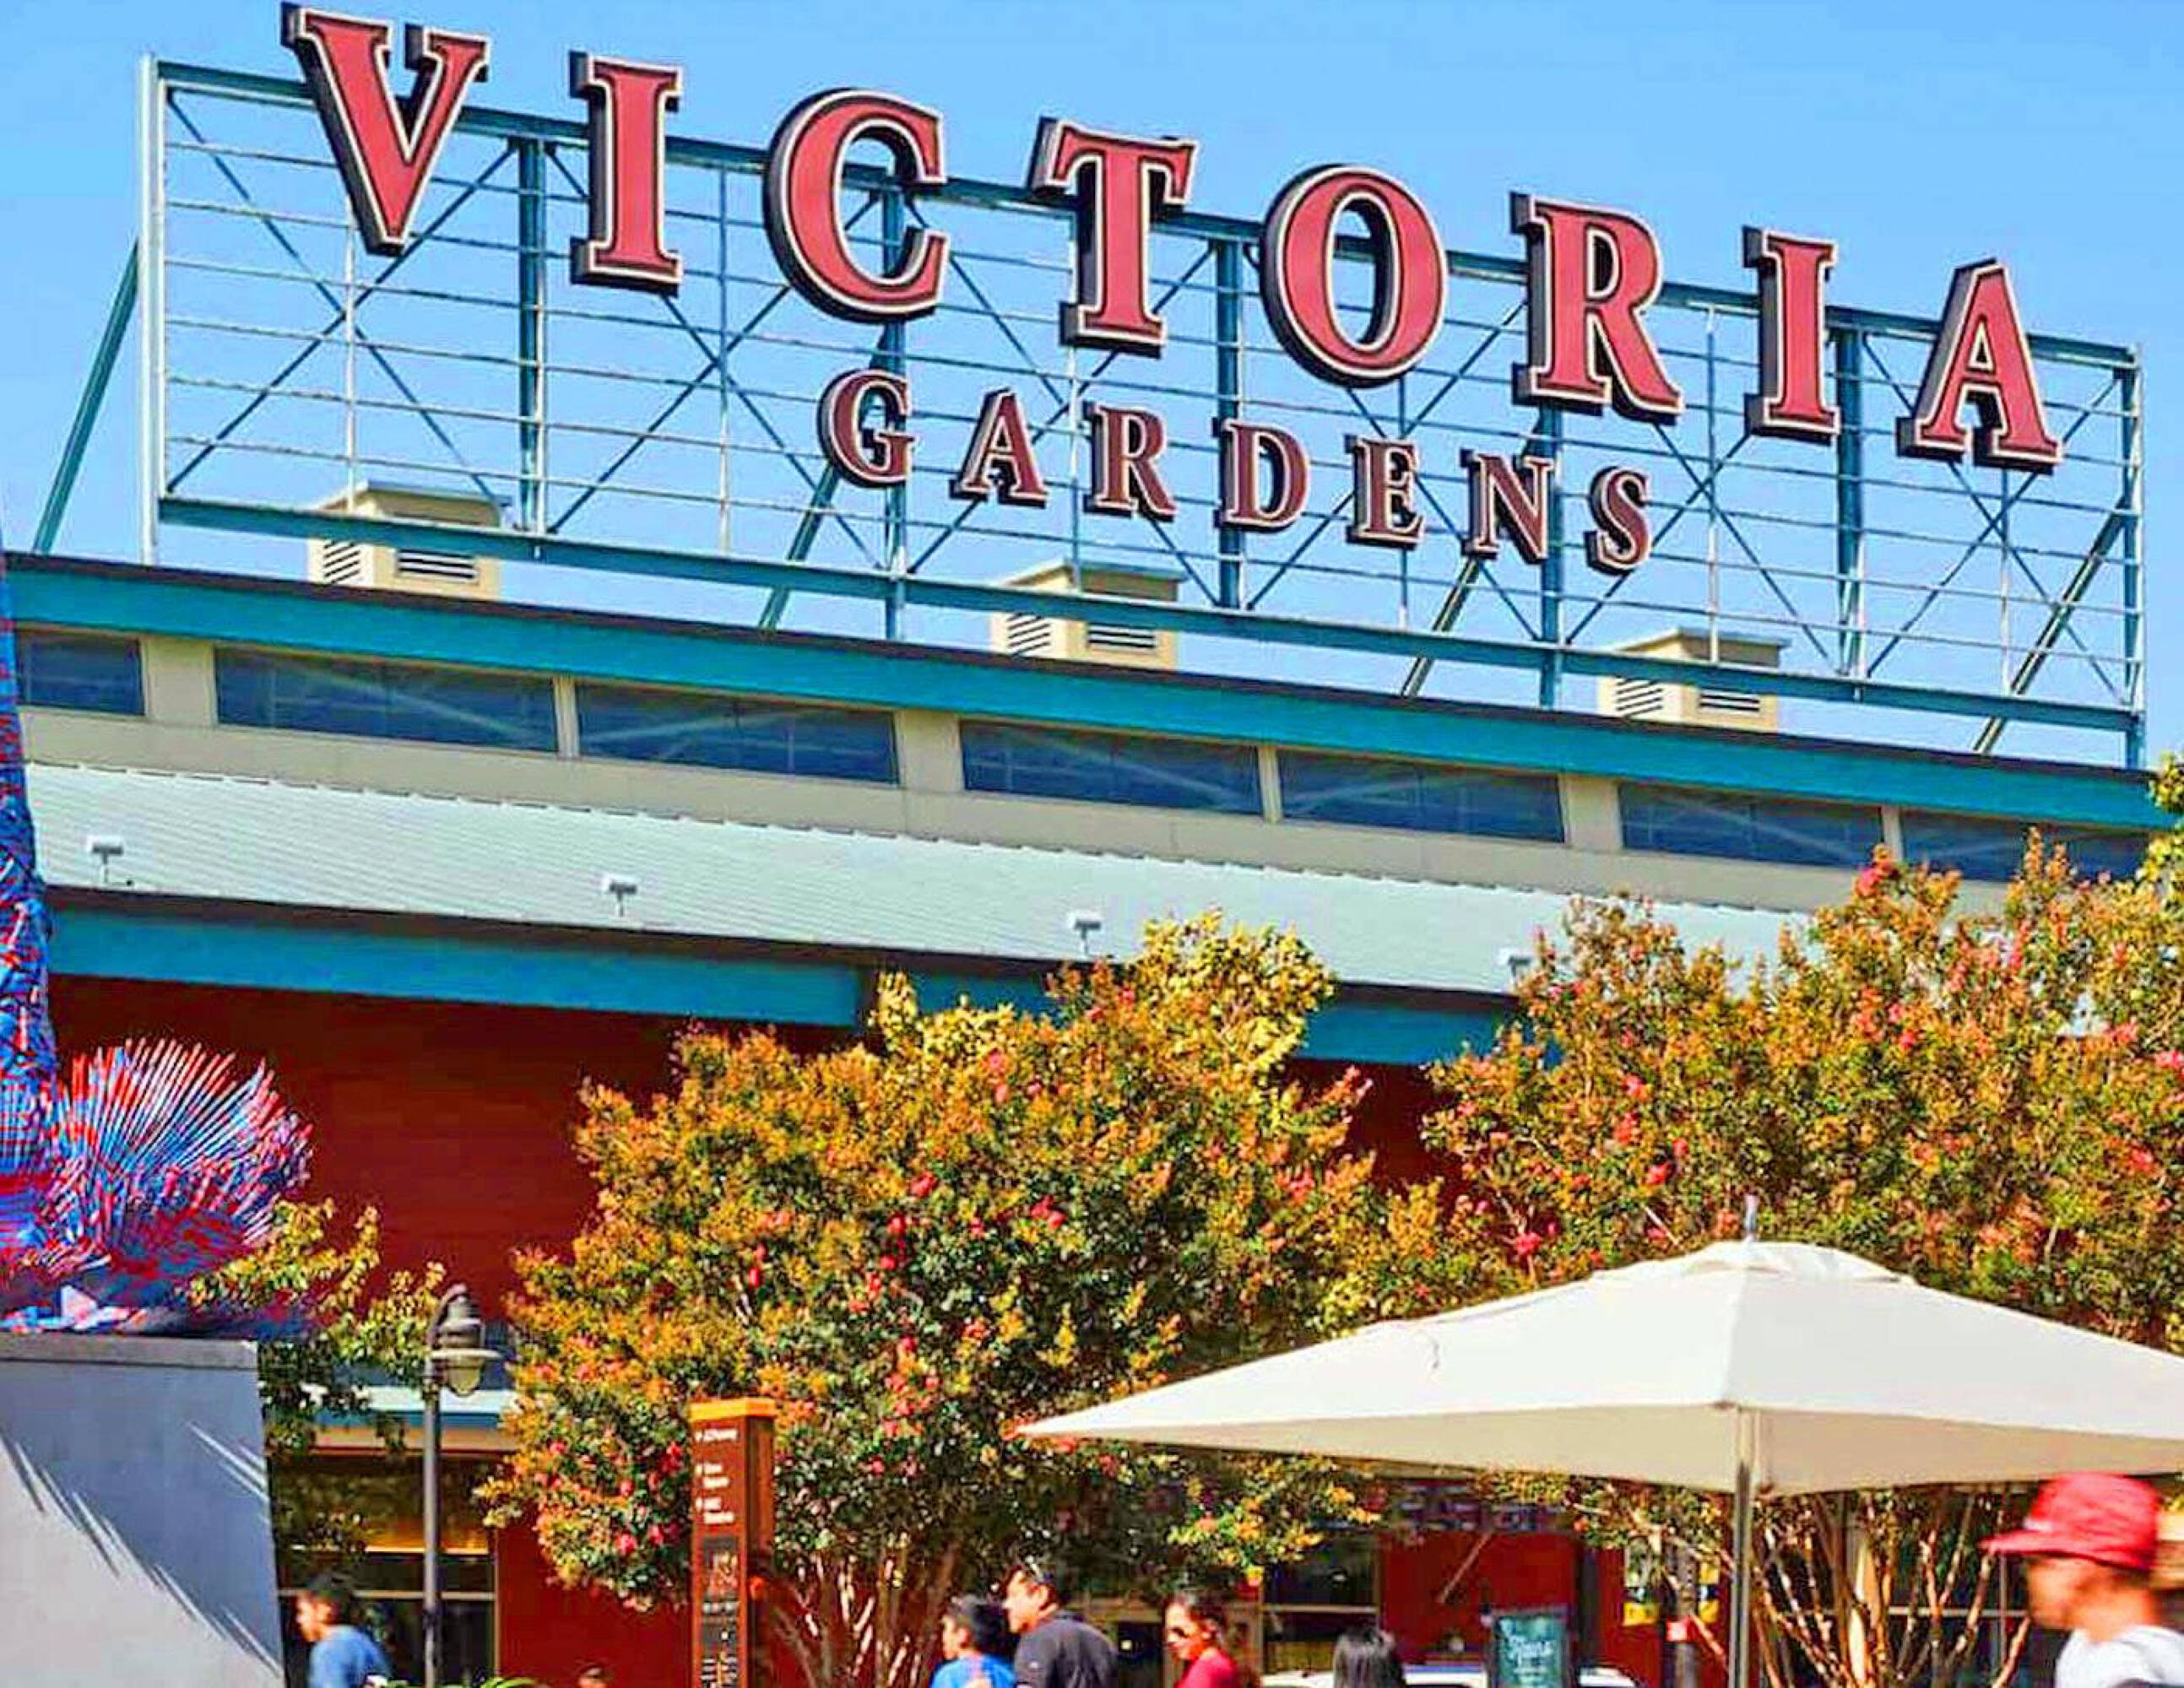 Victoria Gardens Food Court Rancho Cucamonga, CA - Last Updated